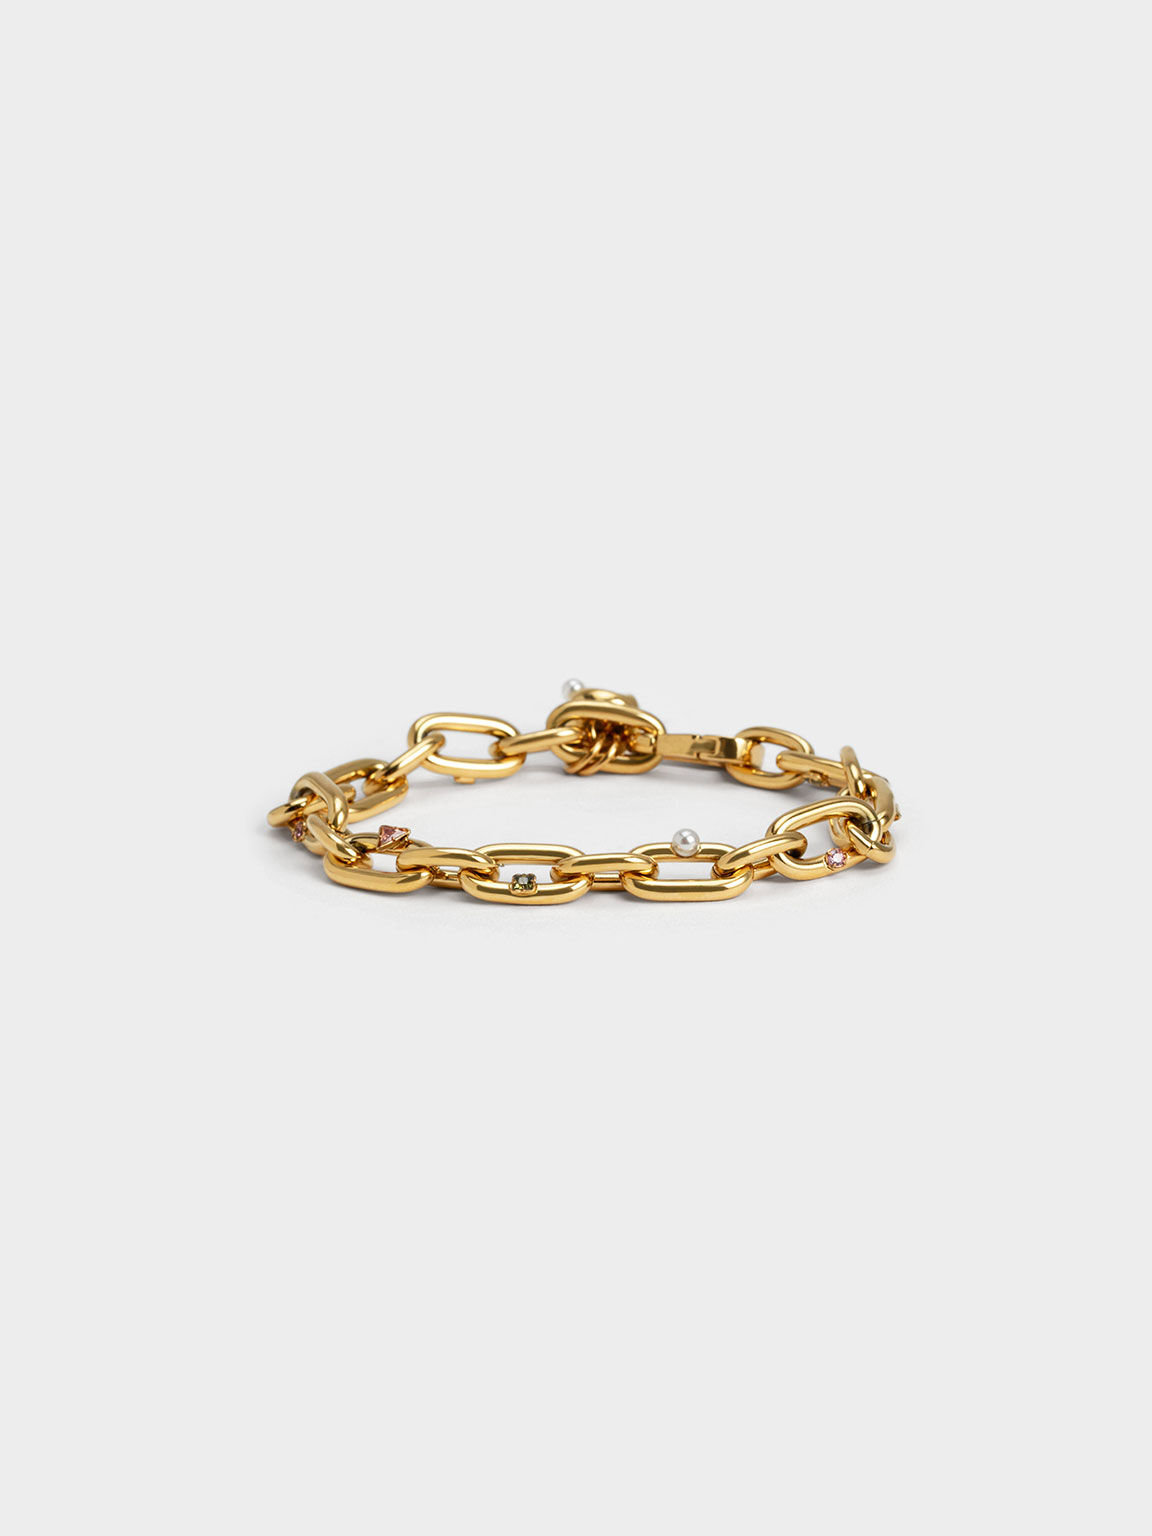 Women's Bracelets | Shop Exclusive Styles | CHARLES & KEITH US